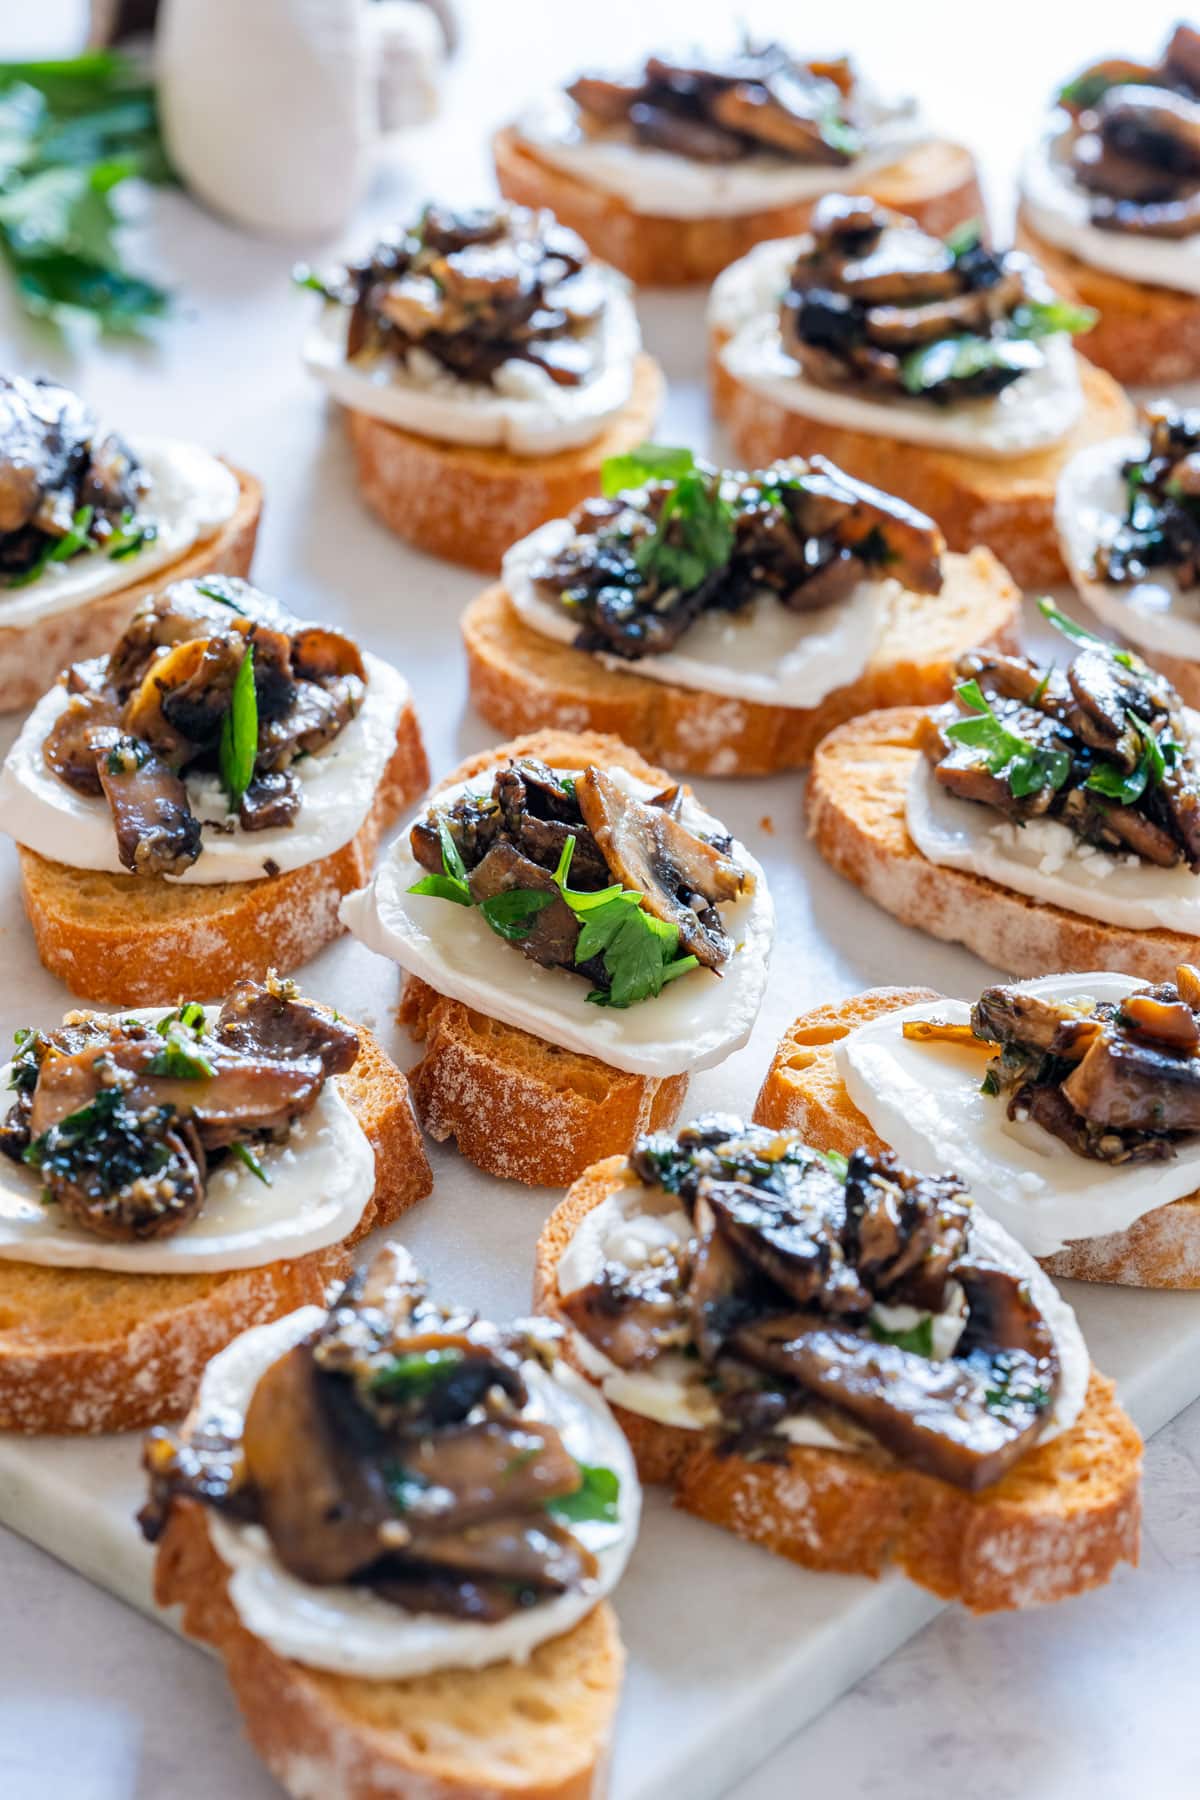 Mushroom crostini with goat cheese, topped with parsley.